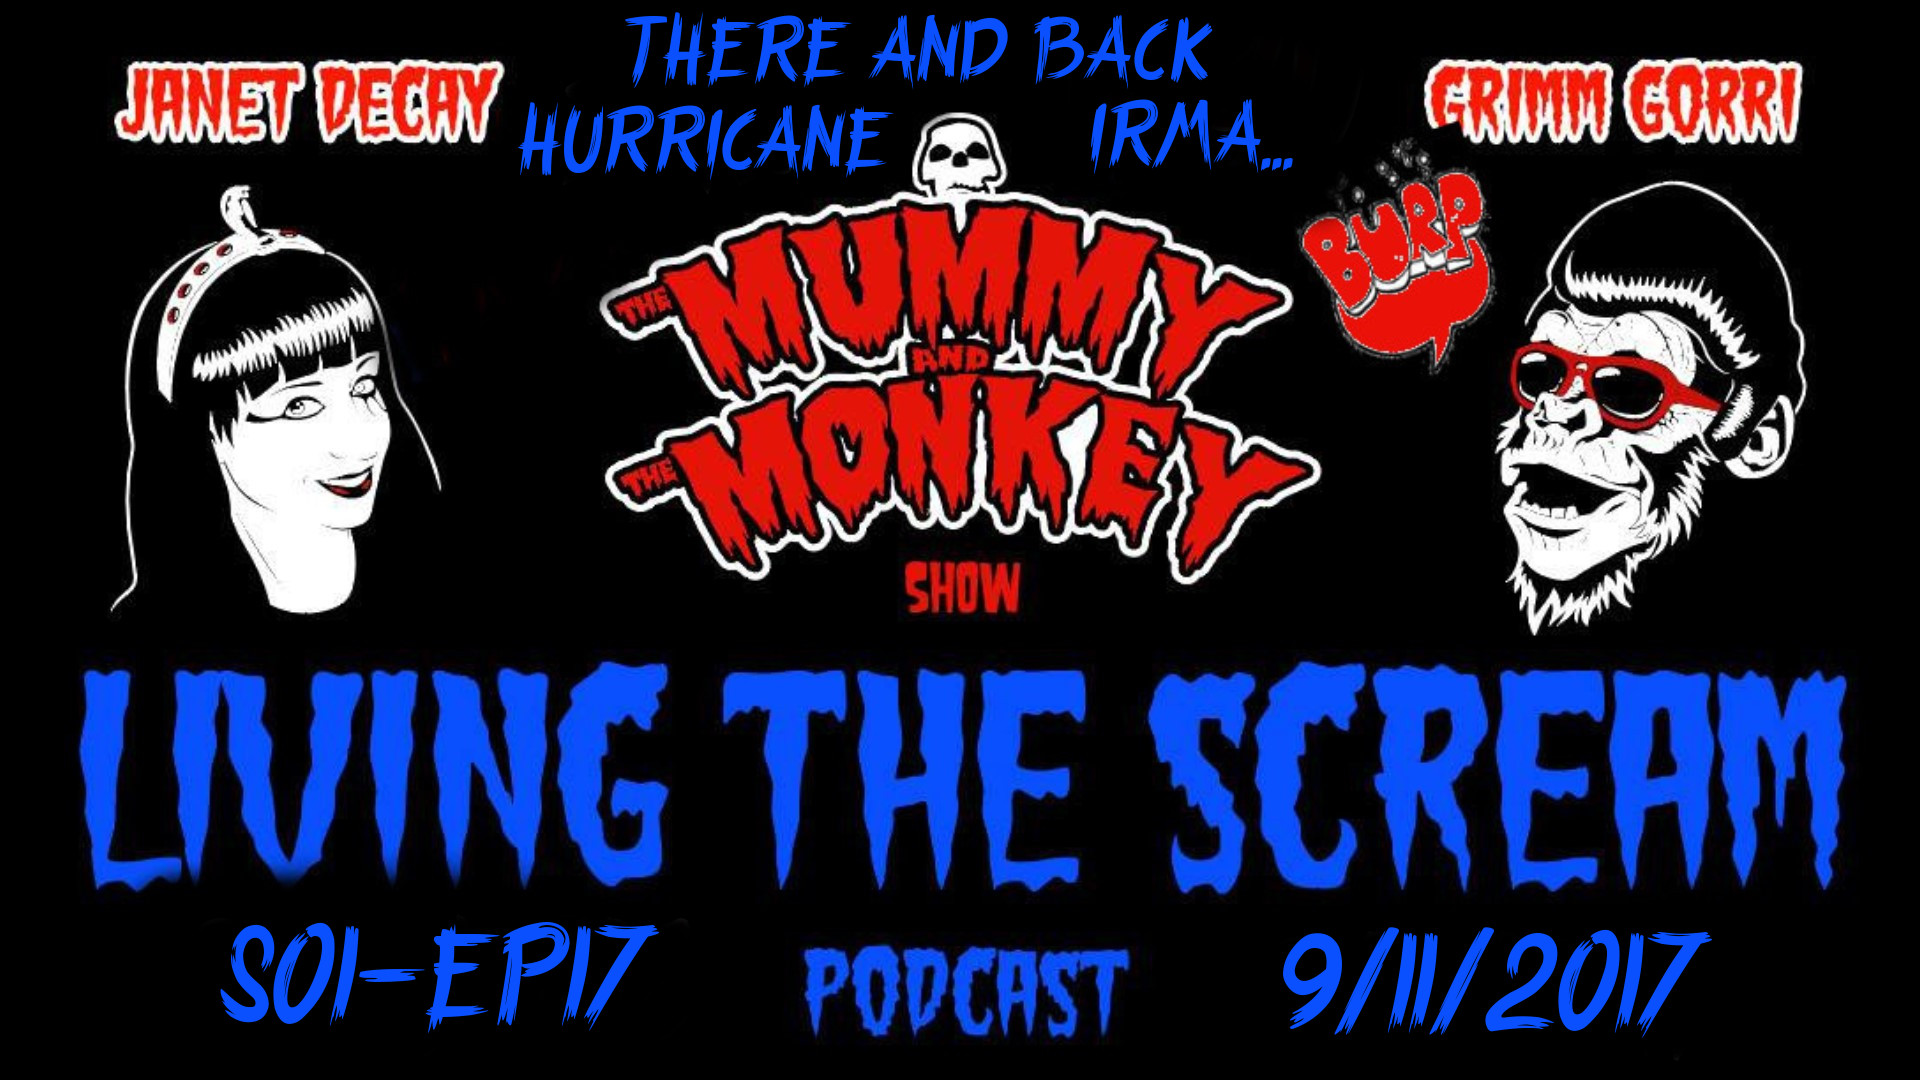 The Mummy & The Monkey’s: Living The Scream Podcast S01 E17 There and Back Hurricane Irma